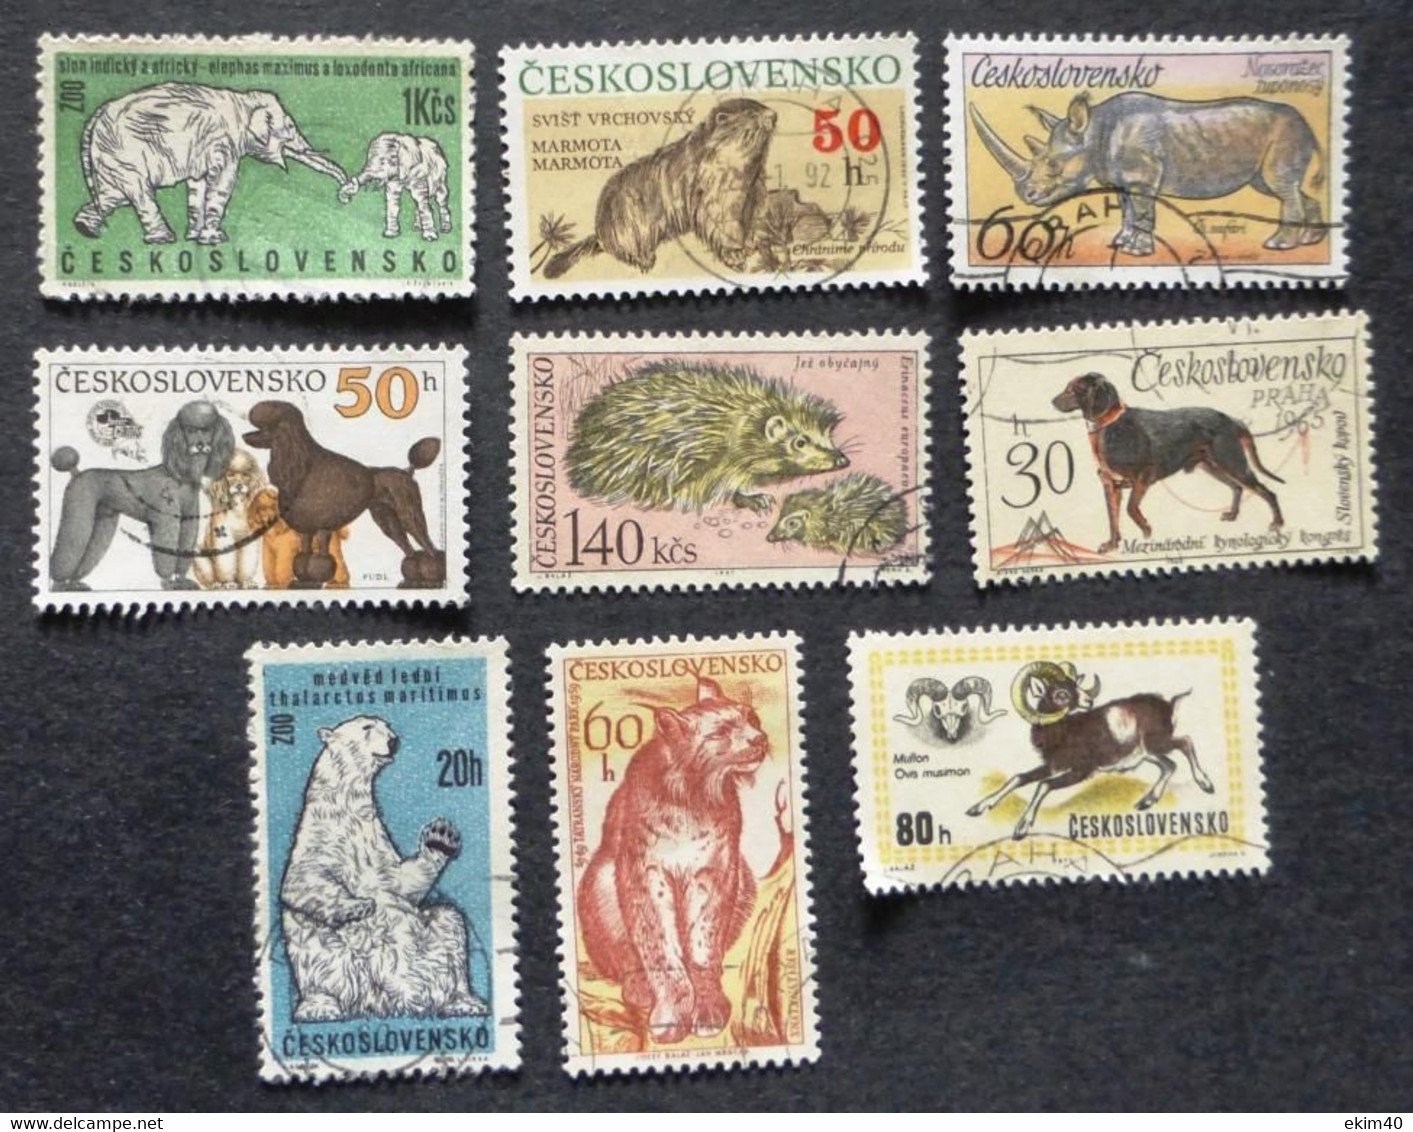 Selection Of Used/Cancelled Stamps From Czechoslovakia Wild & Domestic Animals. No DC-453 - Oblitérés